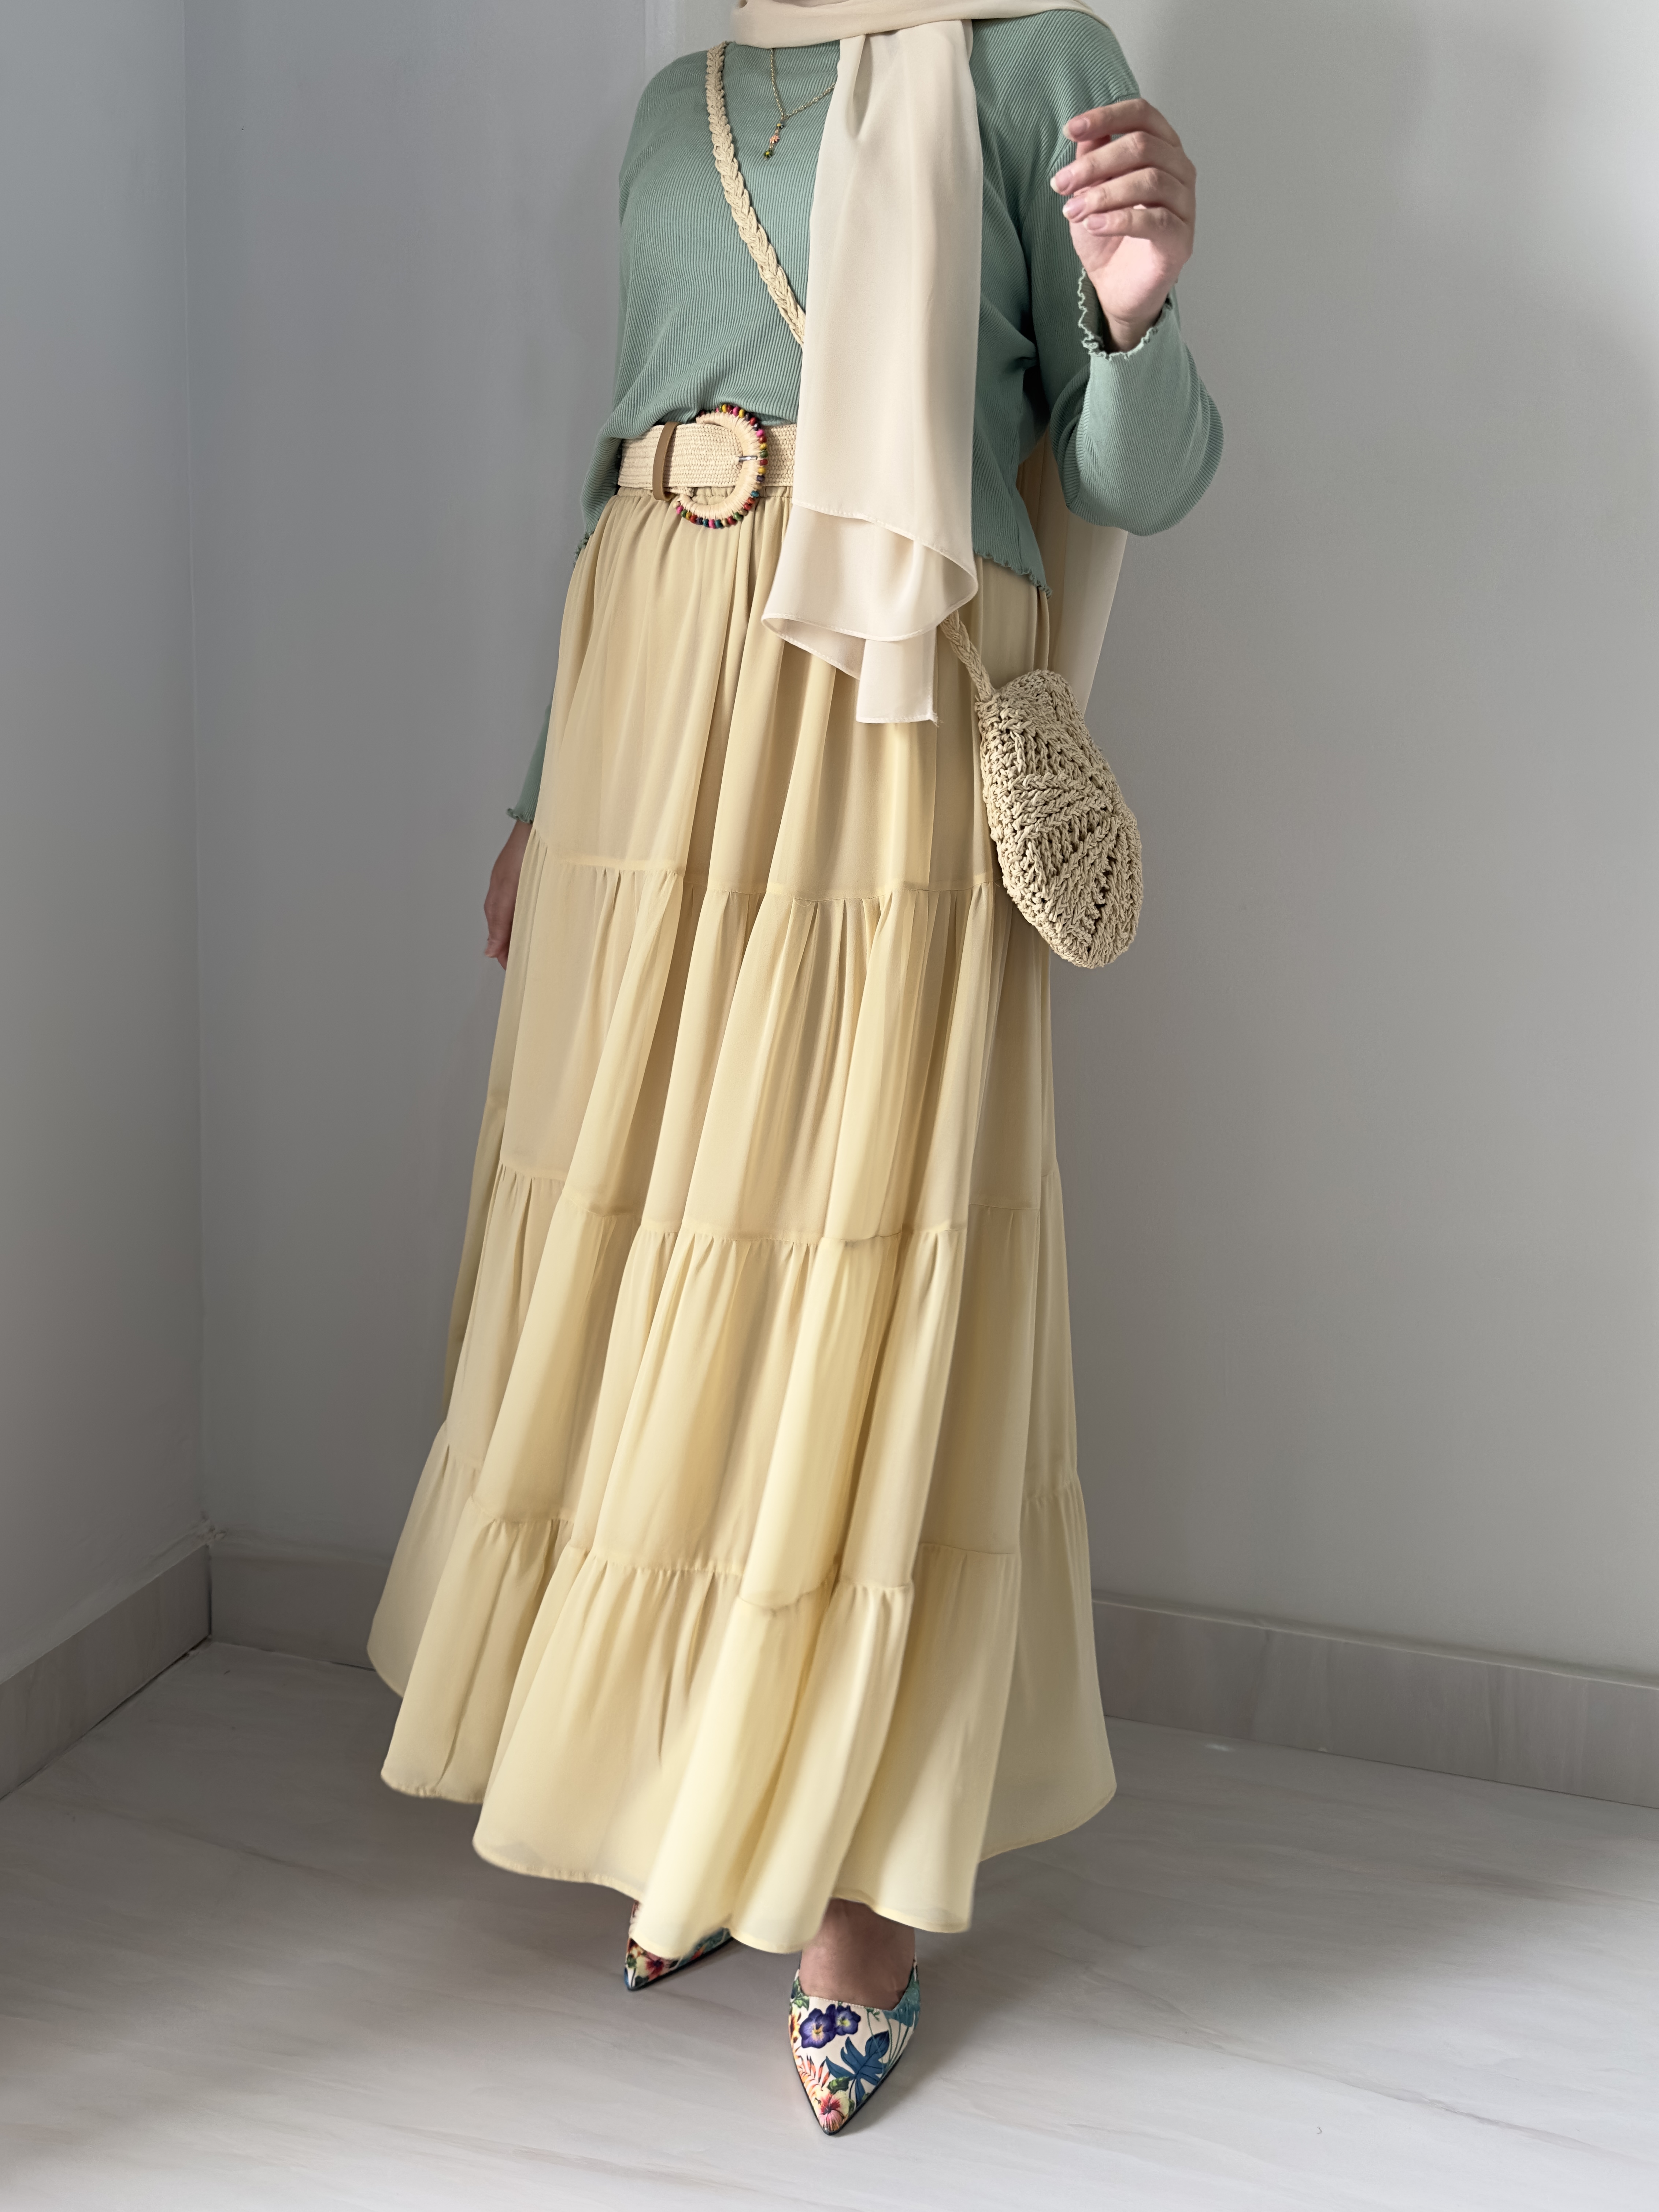 Butter yellow chiffon skirt hover image